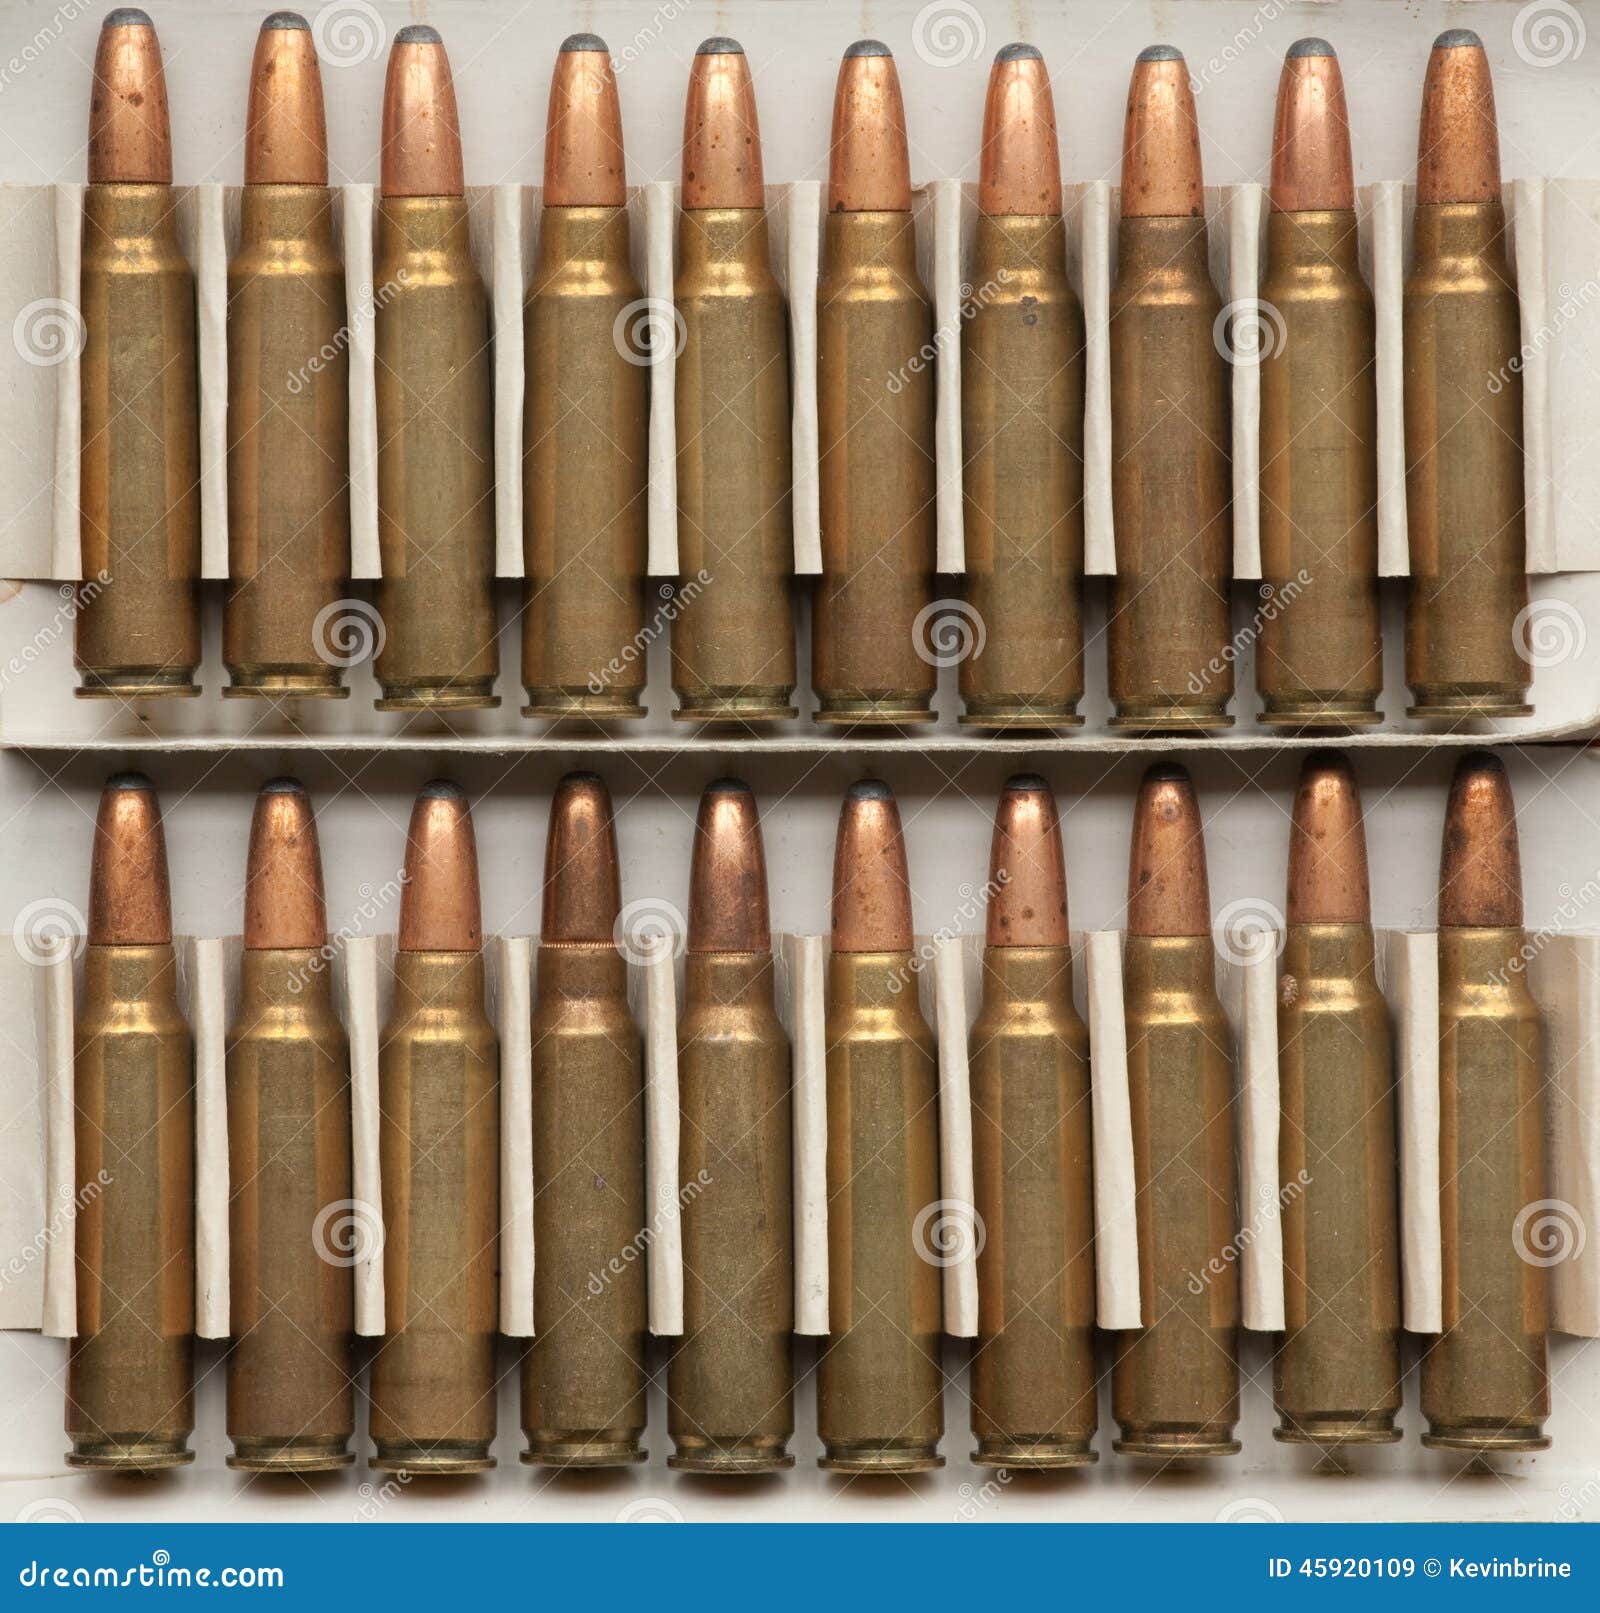 Rifle Ammunition stock image. Image of copper, army, brass - 45920109